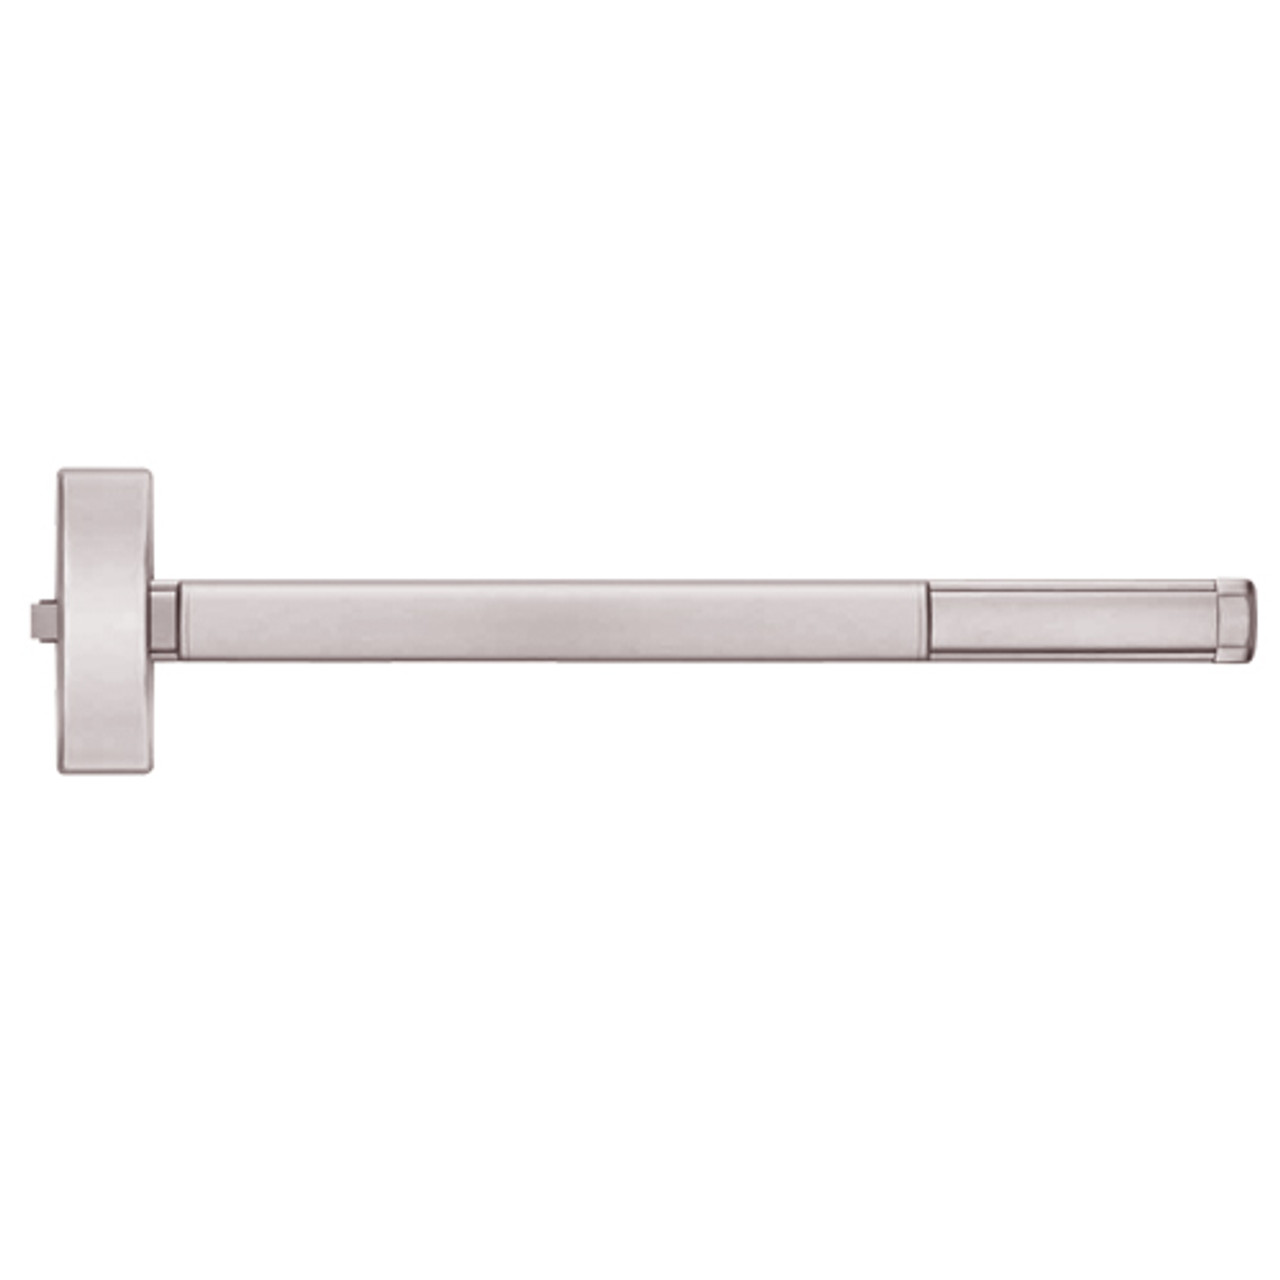 MLR2105-628-48 PHI 2100 Series Non Fire Rated Apex Rim Exit Device with Motorized Latch Retraction Prepped for Key Controls Thumb Piece in Satin Aluminum Finish